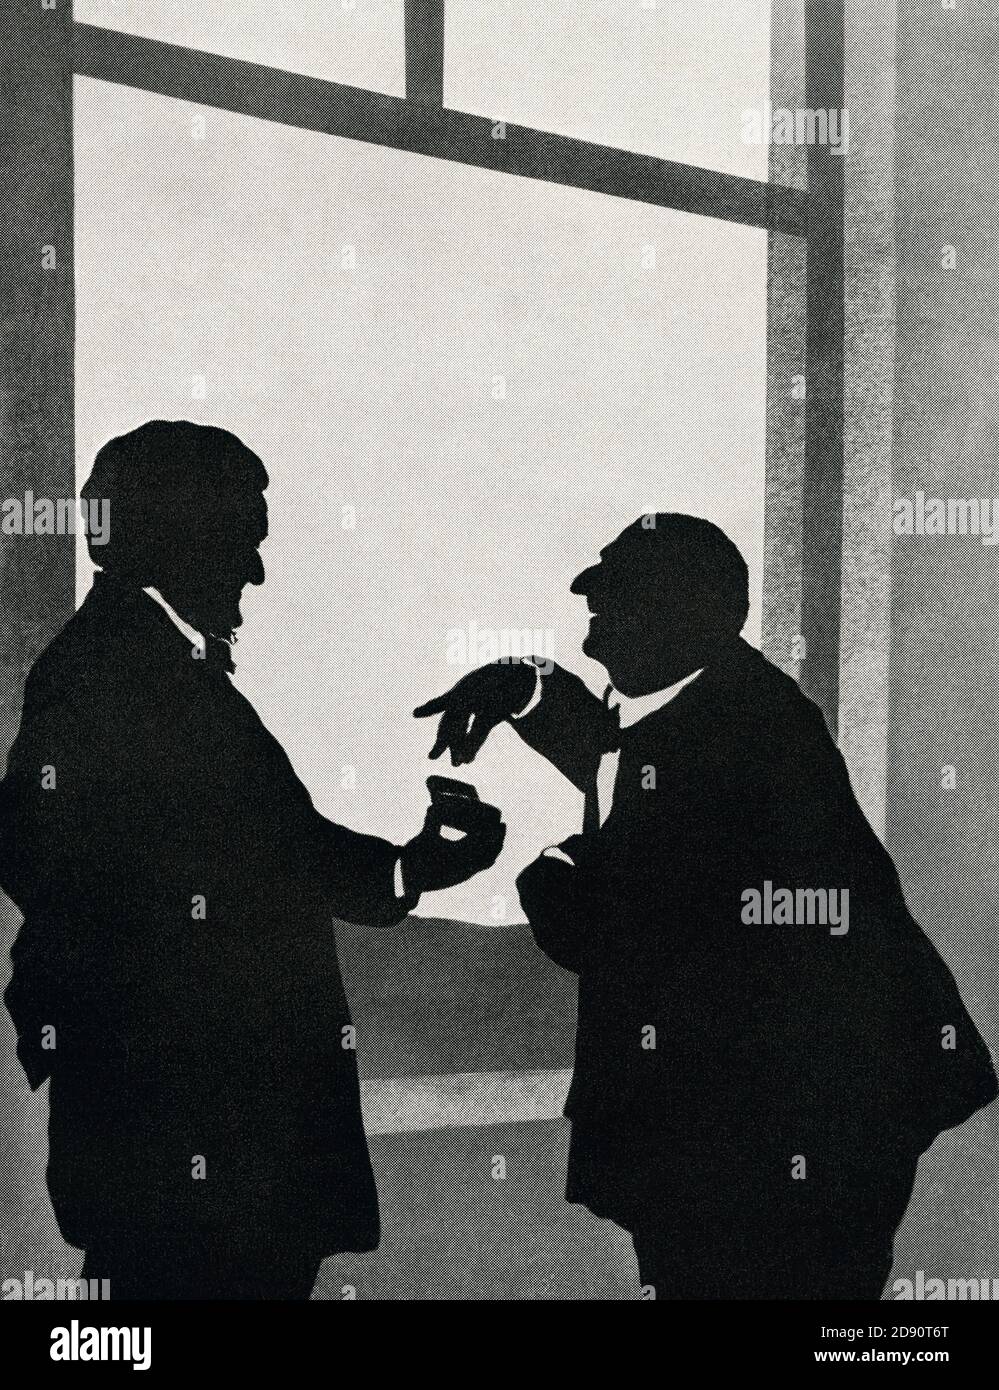 Richard Wagner, left, offers snuff to Anton Bruchner.  A paper cutting or silhouette by Otto Böhler the Austrian silhouette artist.  Wilhelm Richard Wagner, 1813 – 1883. German composer, theatre director, polemicist, and conductor.  Josef Anton Bruckner, 1824 – 1896. Austrian composer, organist, and music theorist.  From Anton Bruchner, 1824 - 1896, Sein Leben in Bildern (His Life in Pictures) Stock Photo